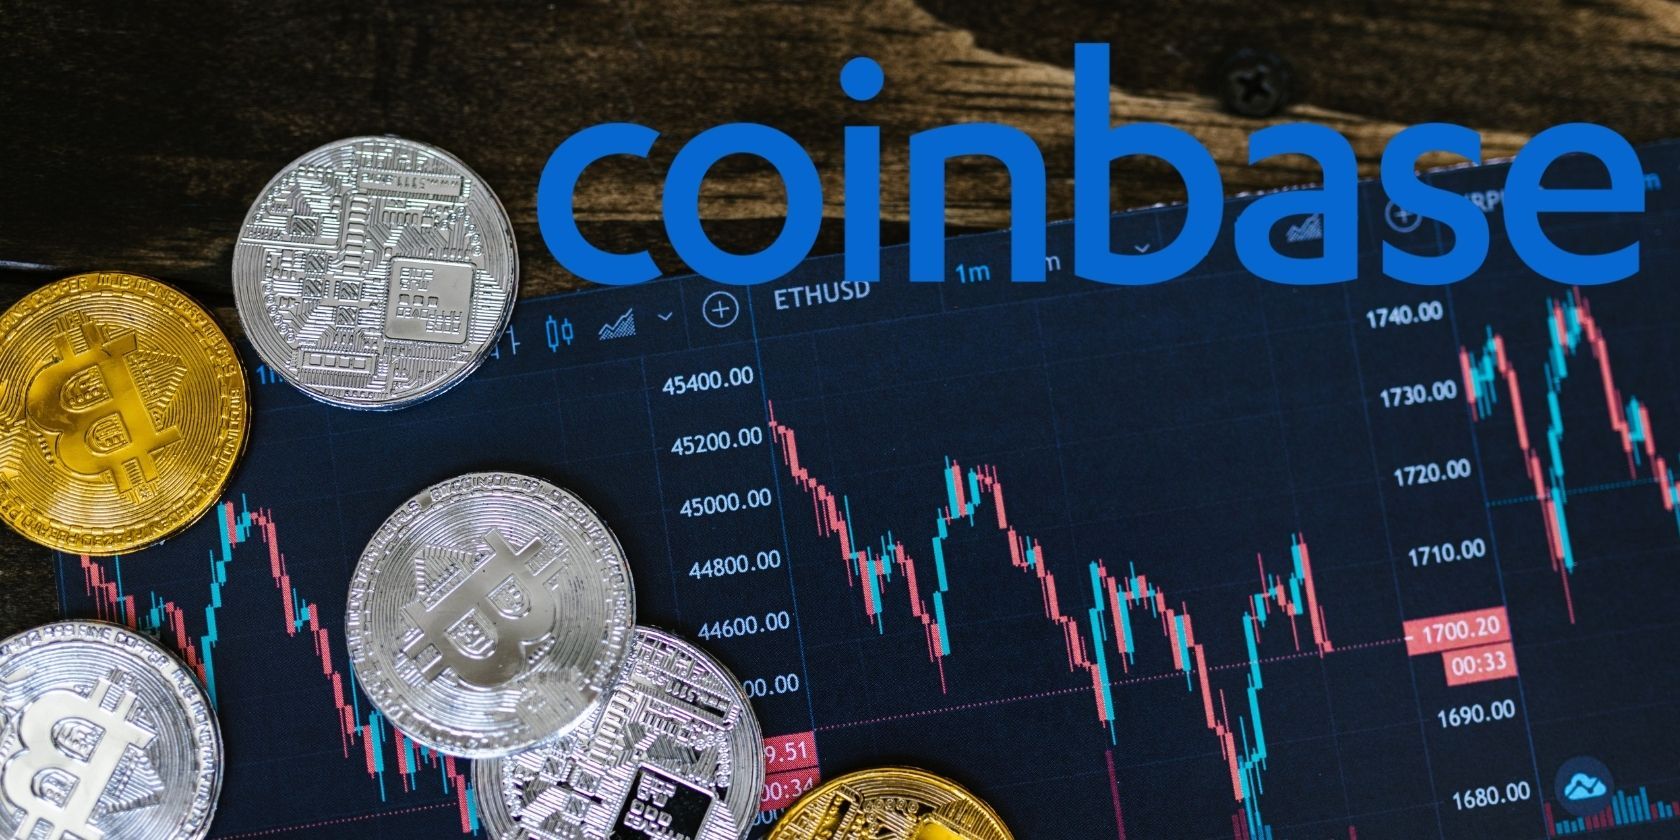 Transferring From Coinbase to Coinbase Pro